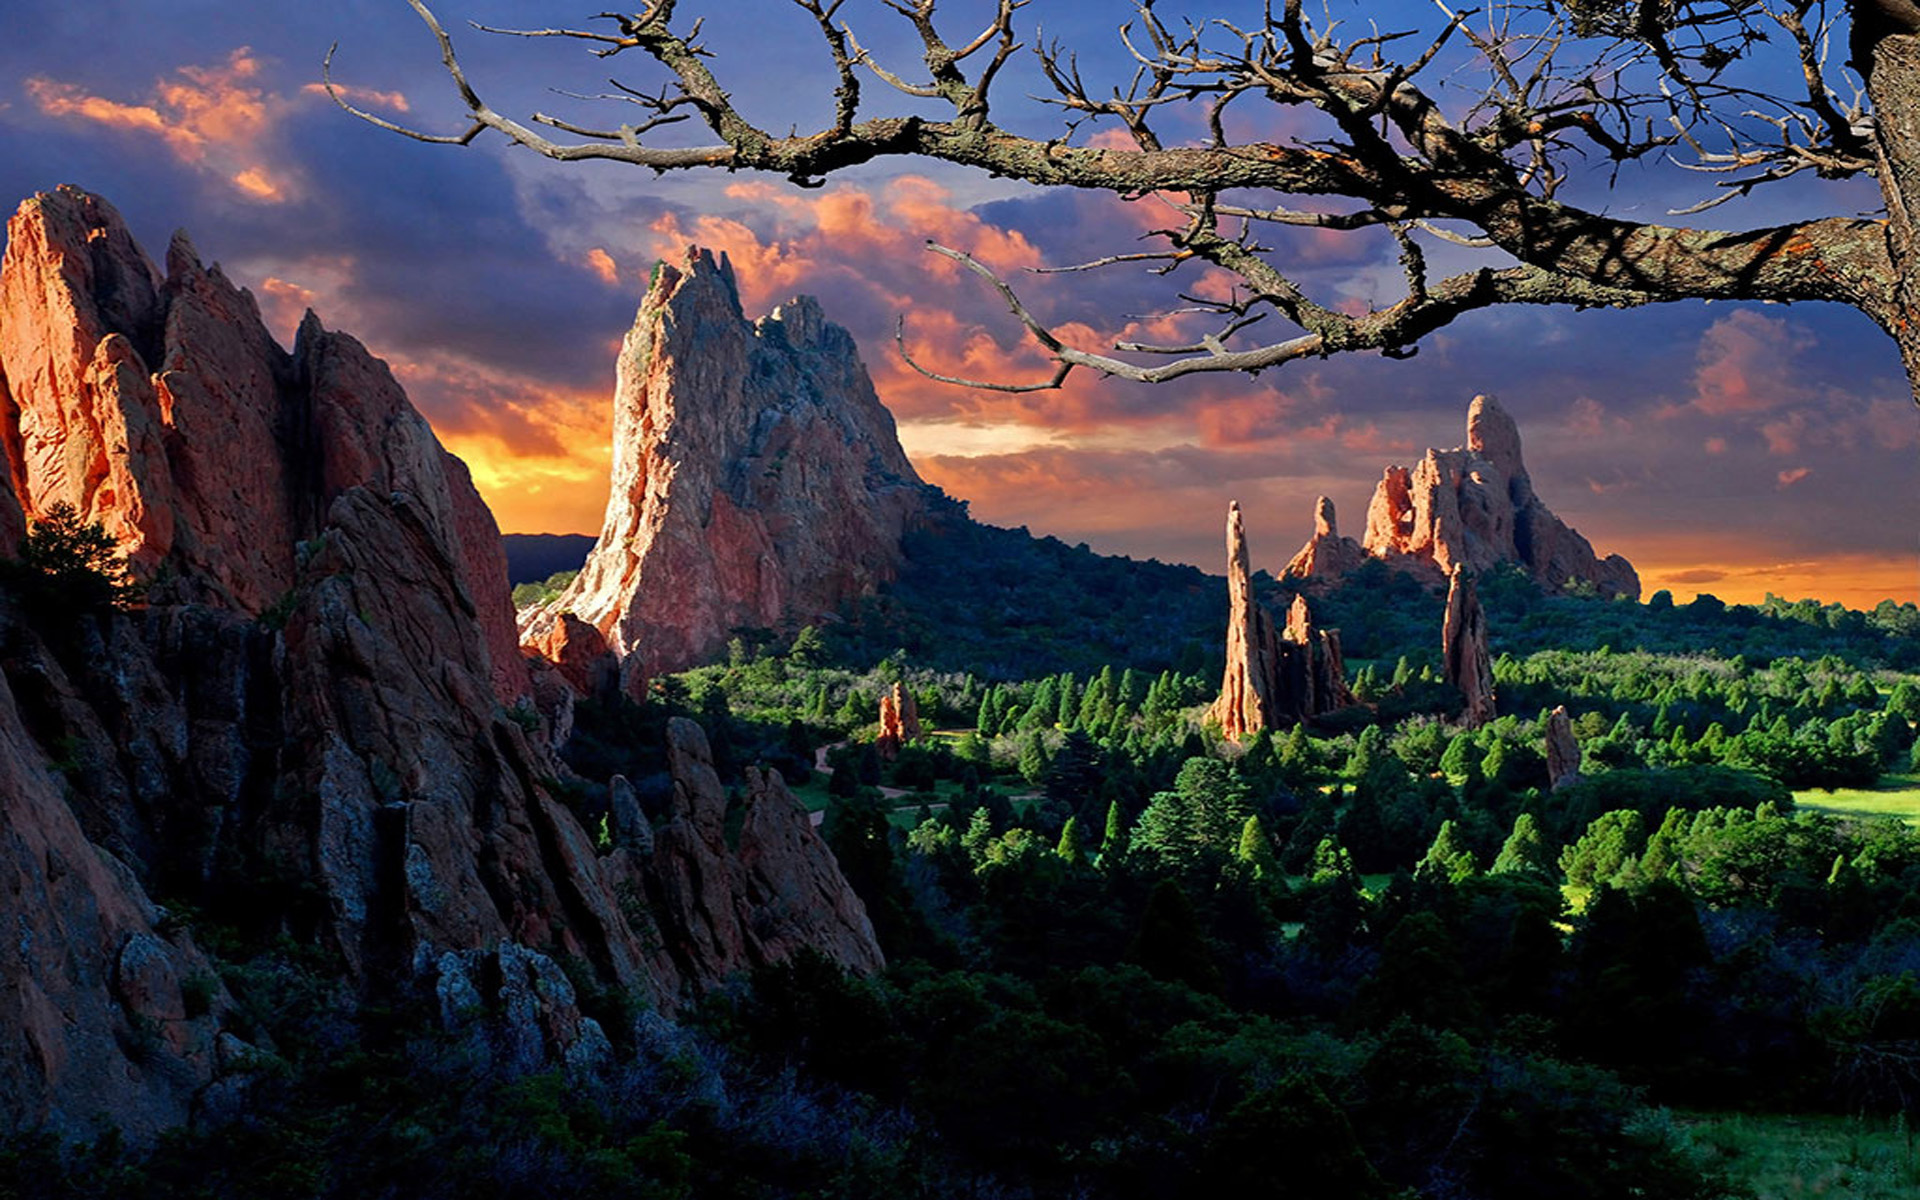 Spring Landscape Sunset In The Garden Of The Gods, Colorado